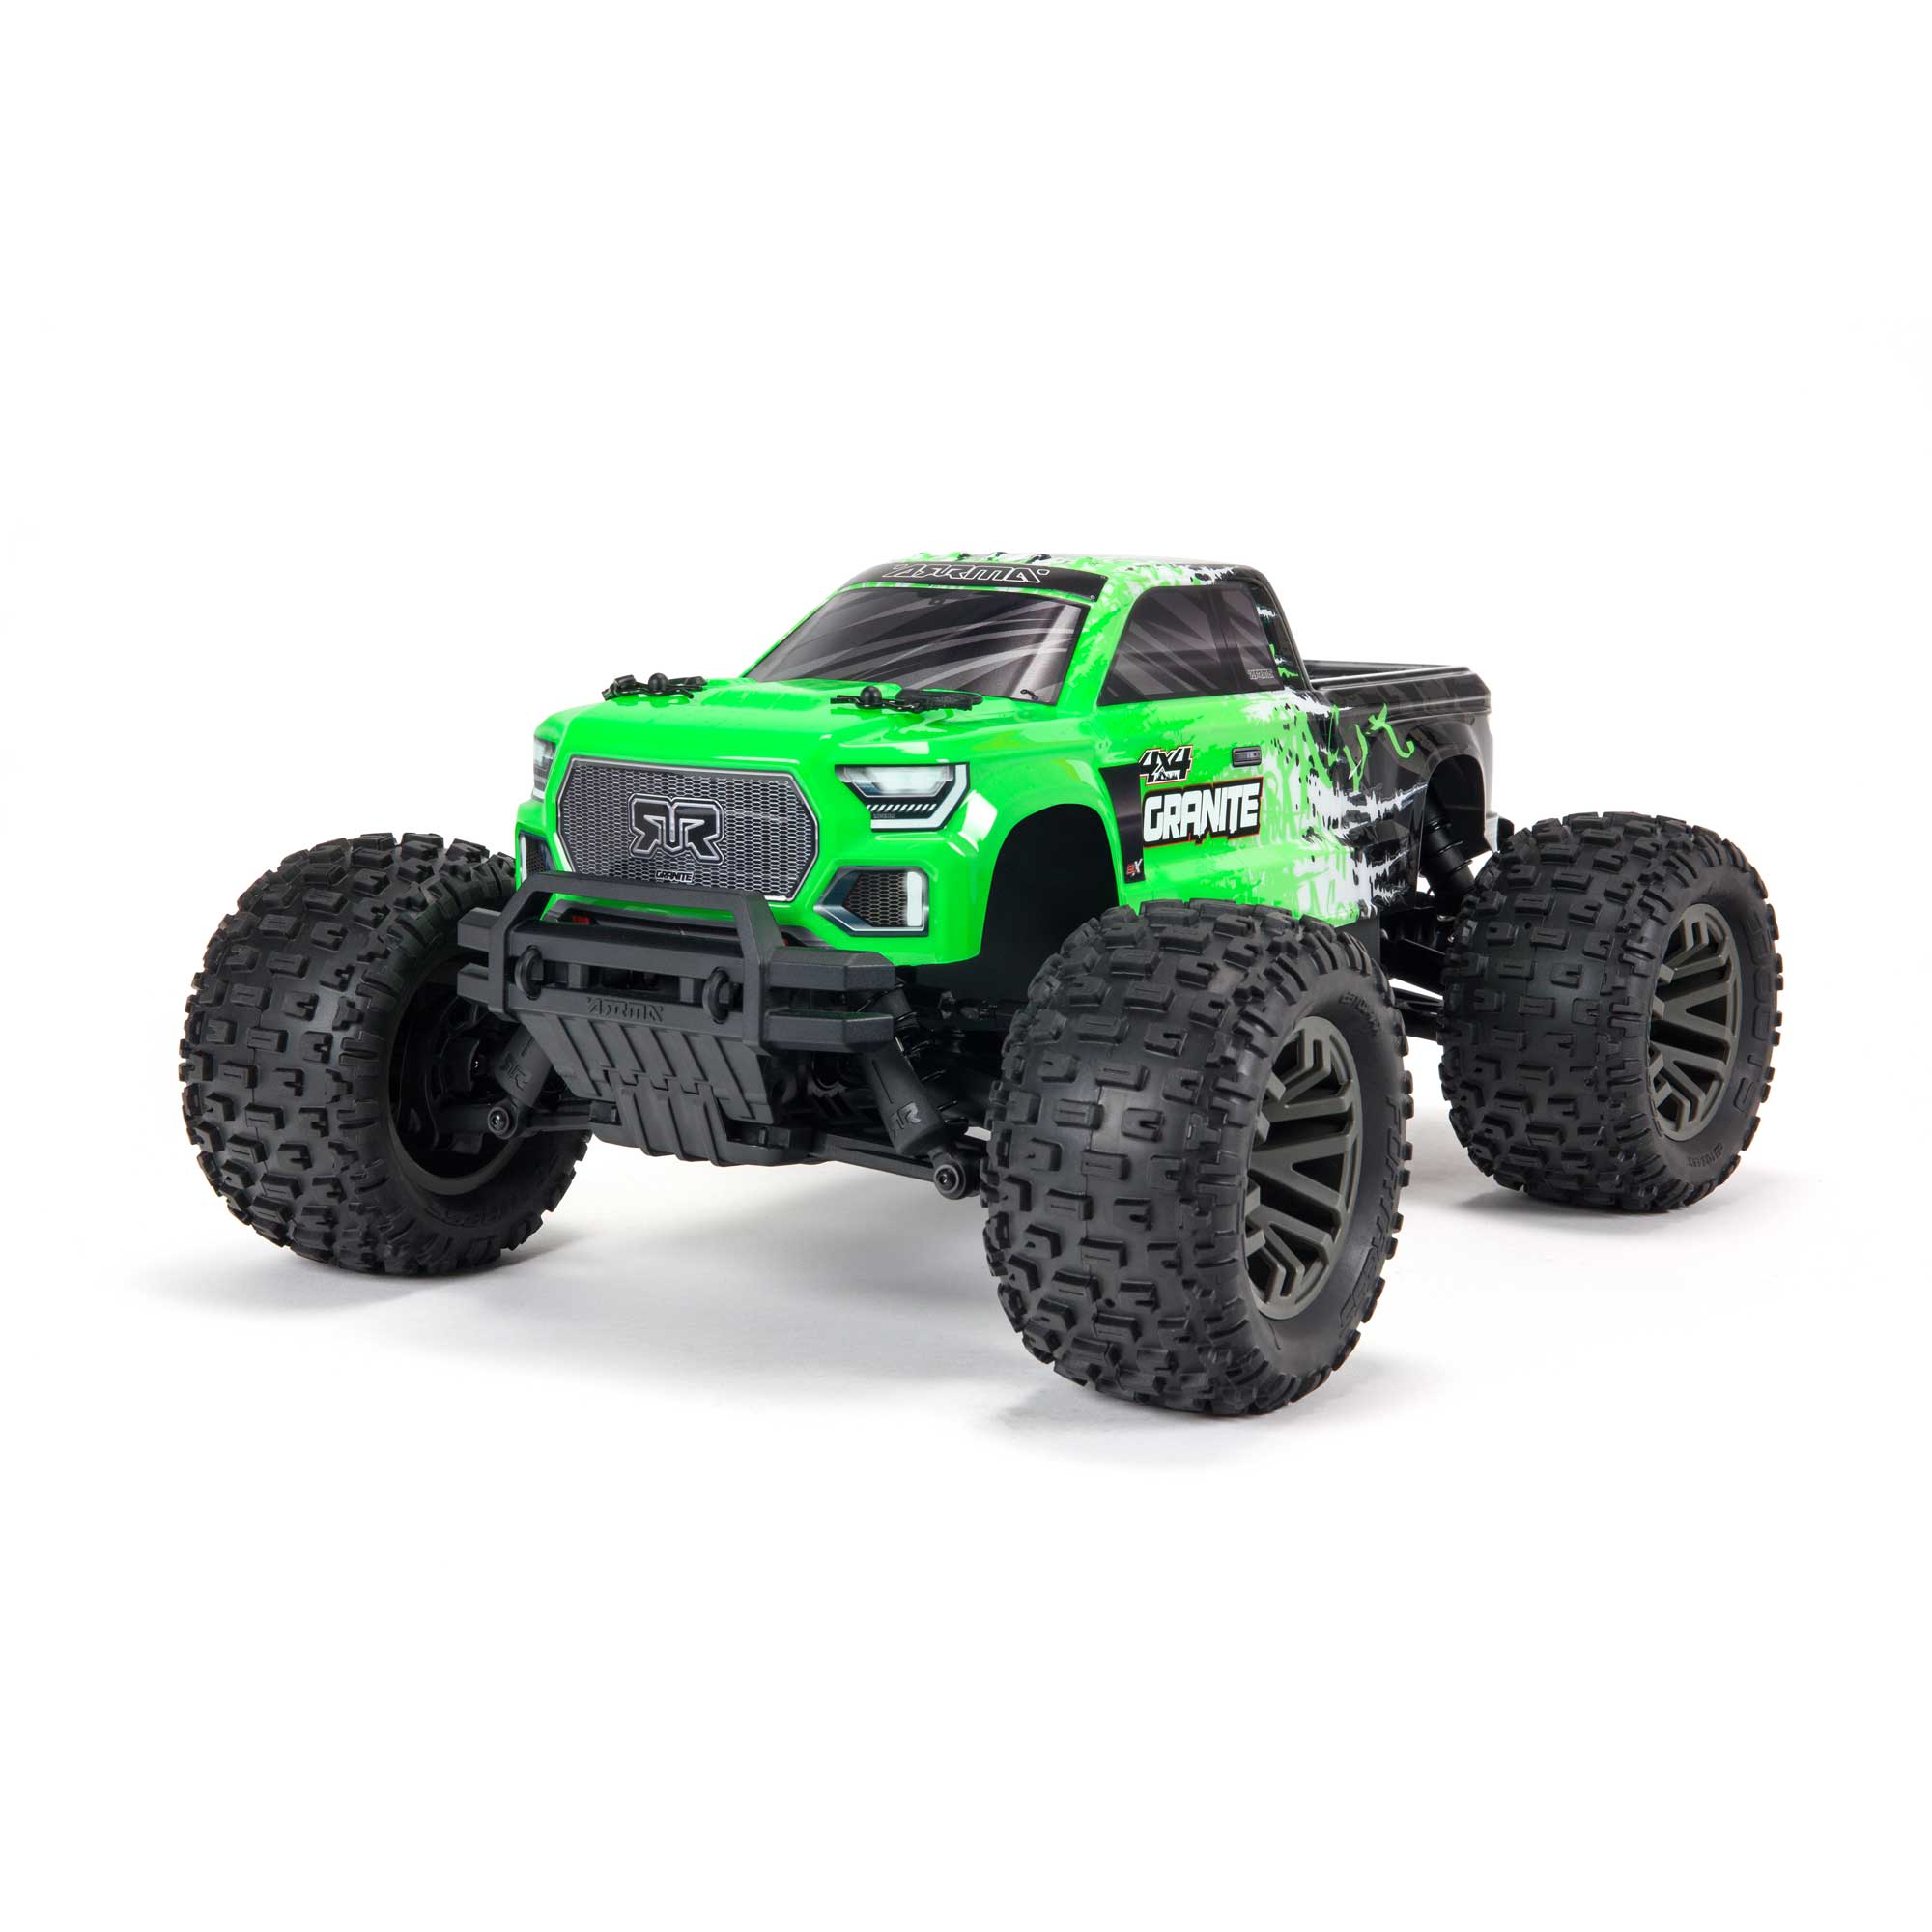 ARRMA RC Truck 1/10 GRANITE 4X4 V3 3S BLX Brushless Monster Truck RTR Battery and Charger Not Included Green ARA4302V3T1 Trucks Electric RTR 1/10 Off-Road - image 1 of 11